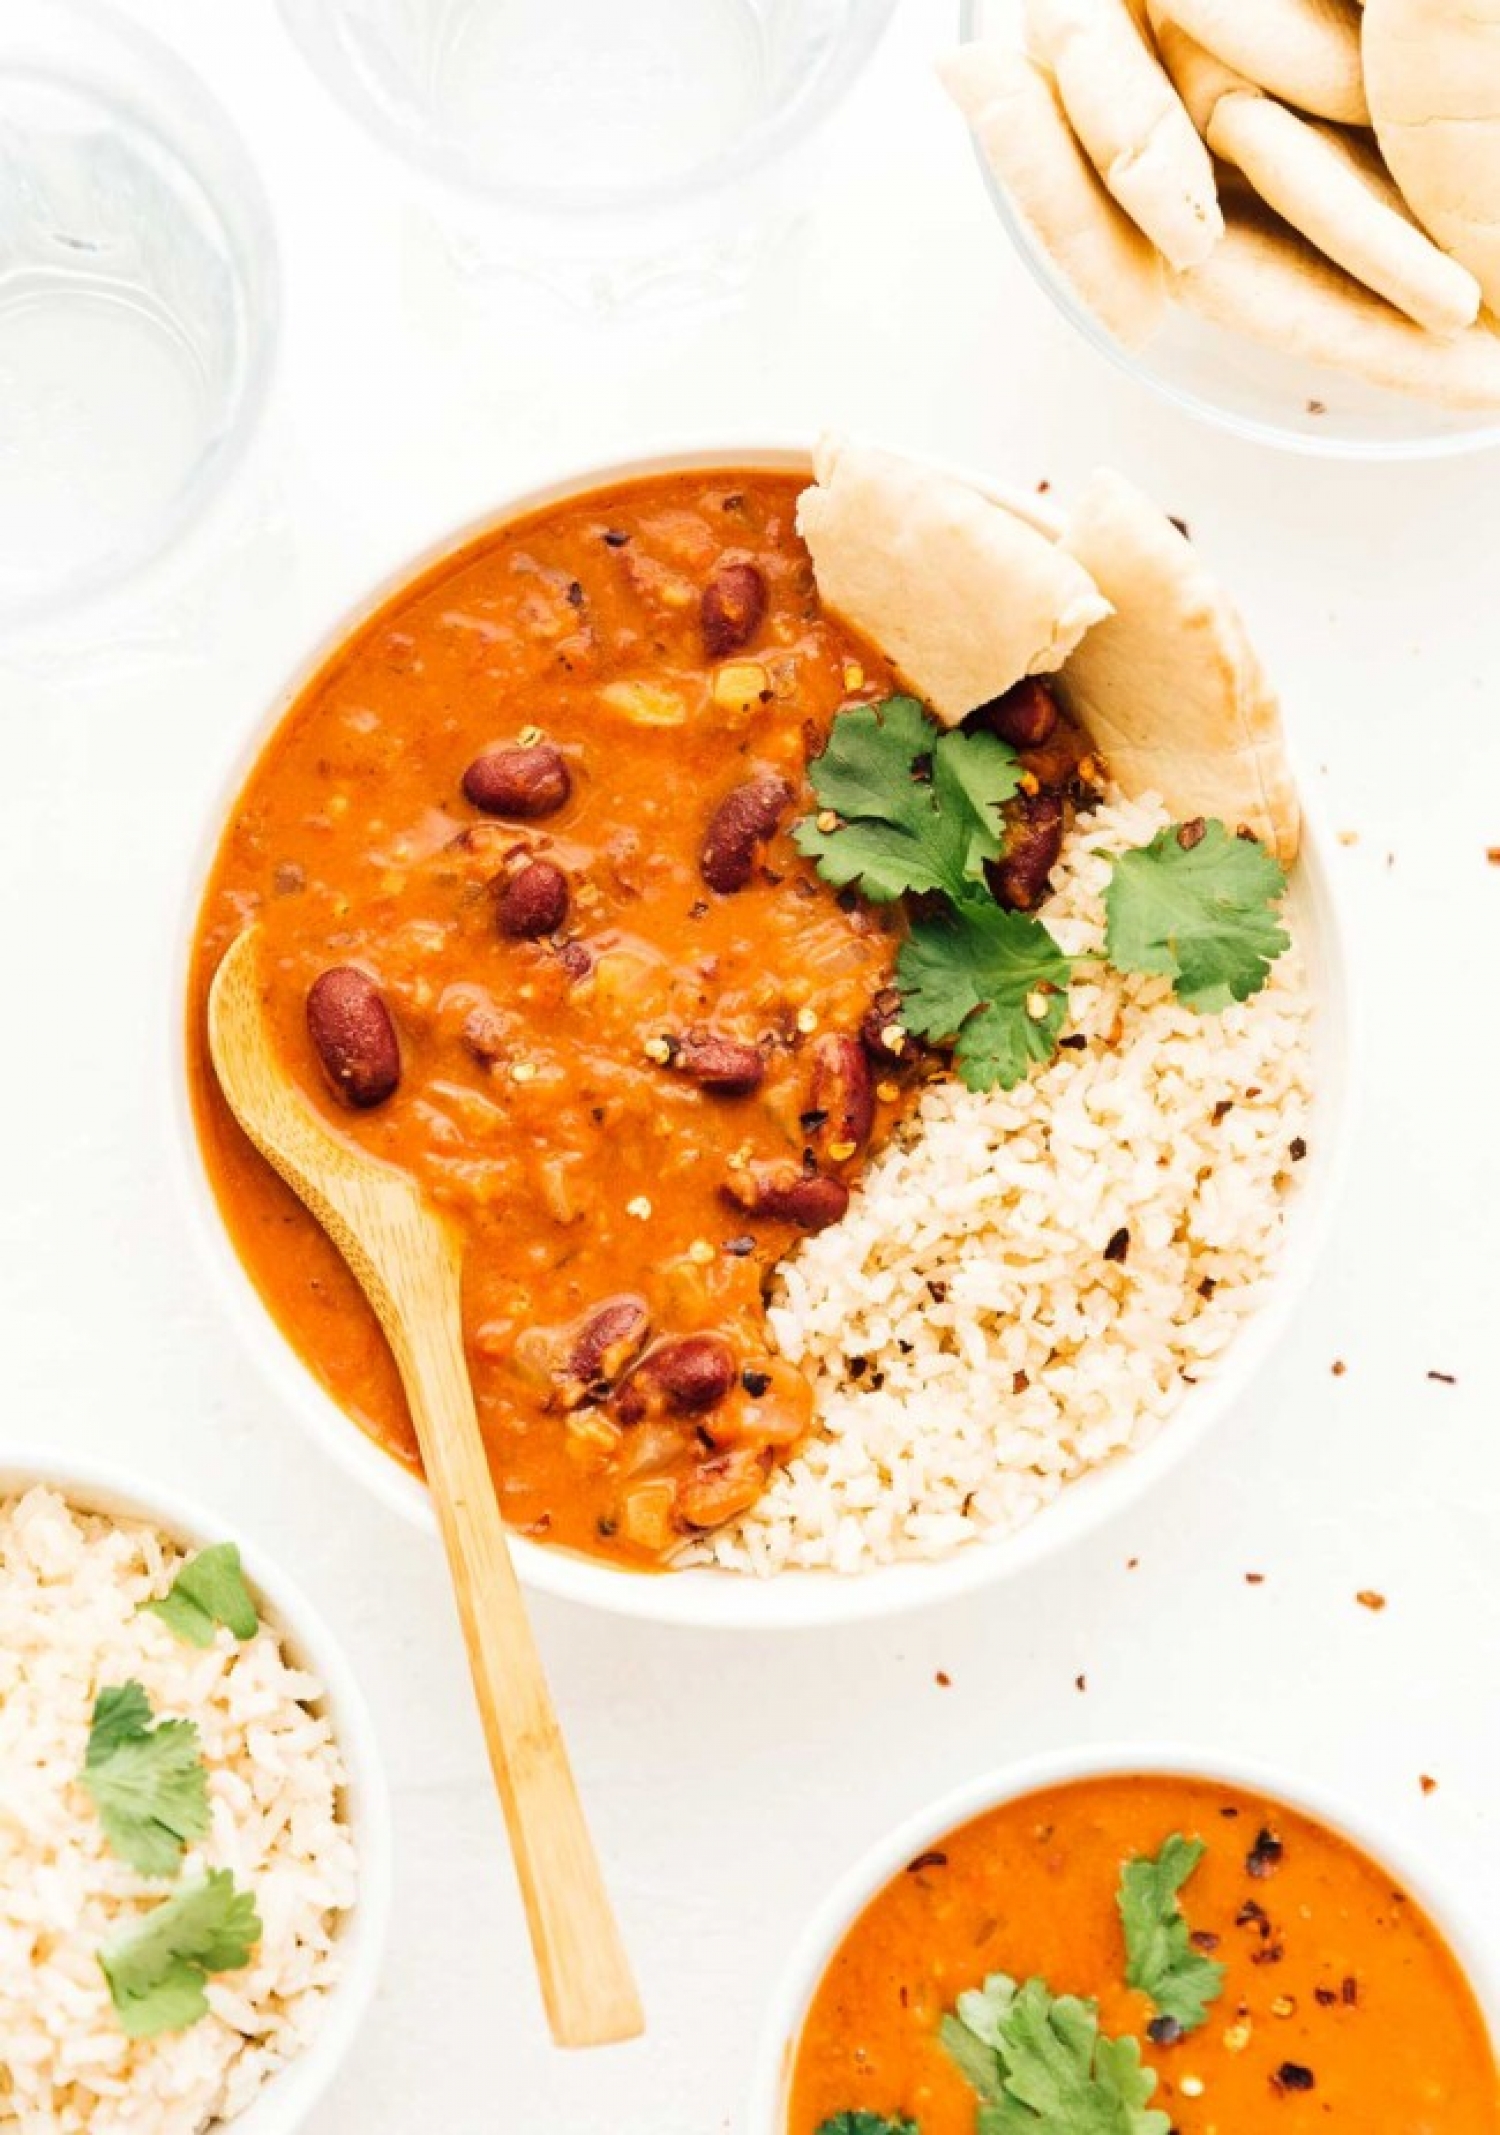 <p>For an Indian-inspired vegetarian meal, turn to this creamy coconut kidney bean curry that's ready in just 15 minutes (yes, really!). Who needs takeout when you can get a cozy meal like this on the table in a hurry? Not to mention, it comes together with simple pantry staples. <a href="https://www.liveeatlearn.com/coconut-kidney-bean-curry/" rel="noopener">Get the recipe here.</a></p>